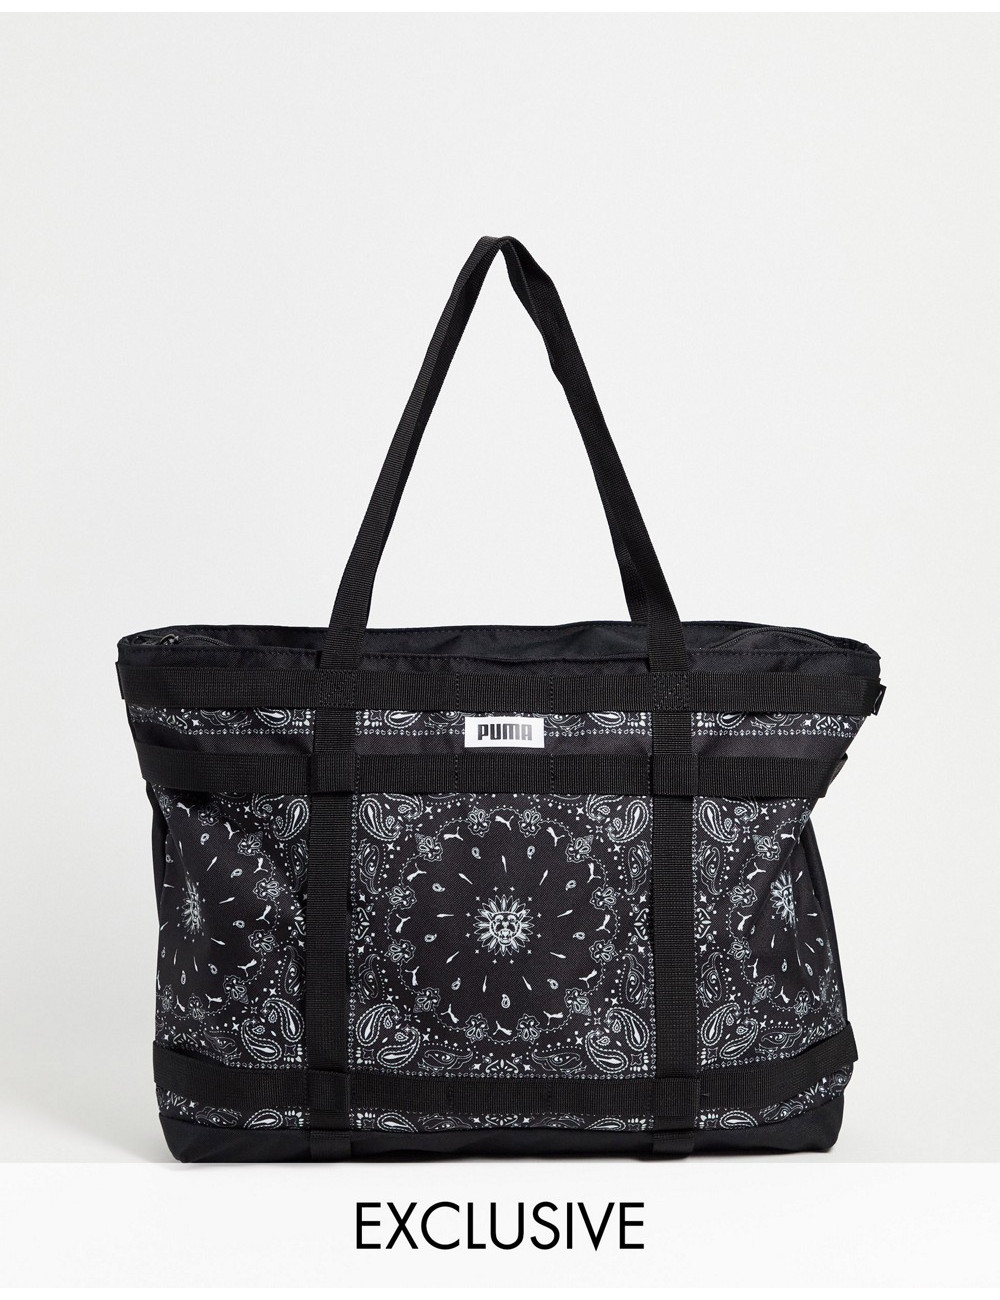 Puma paisley large tote in...